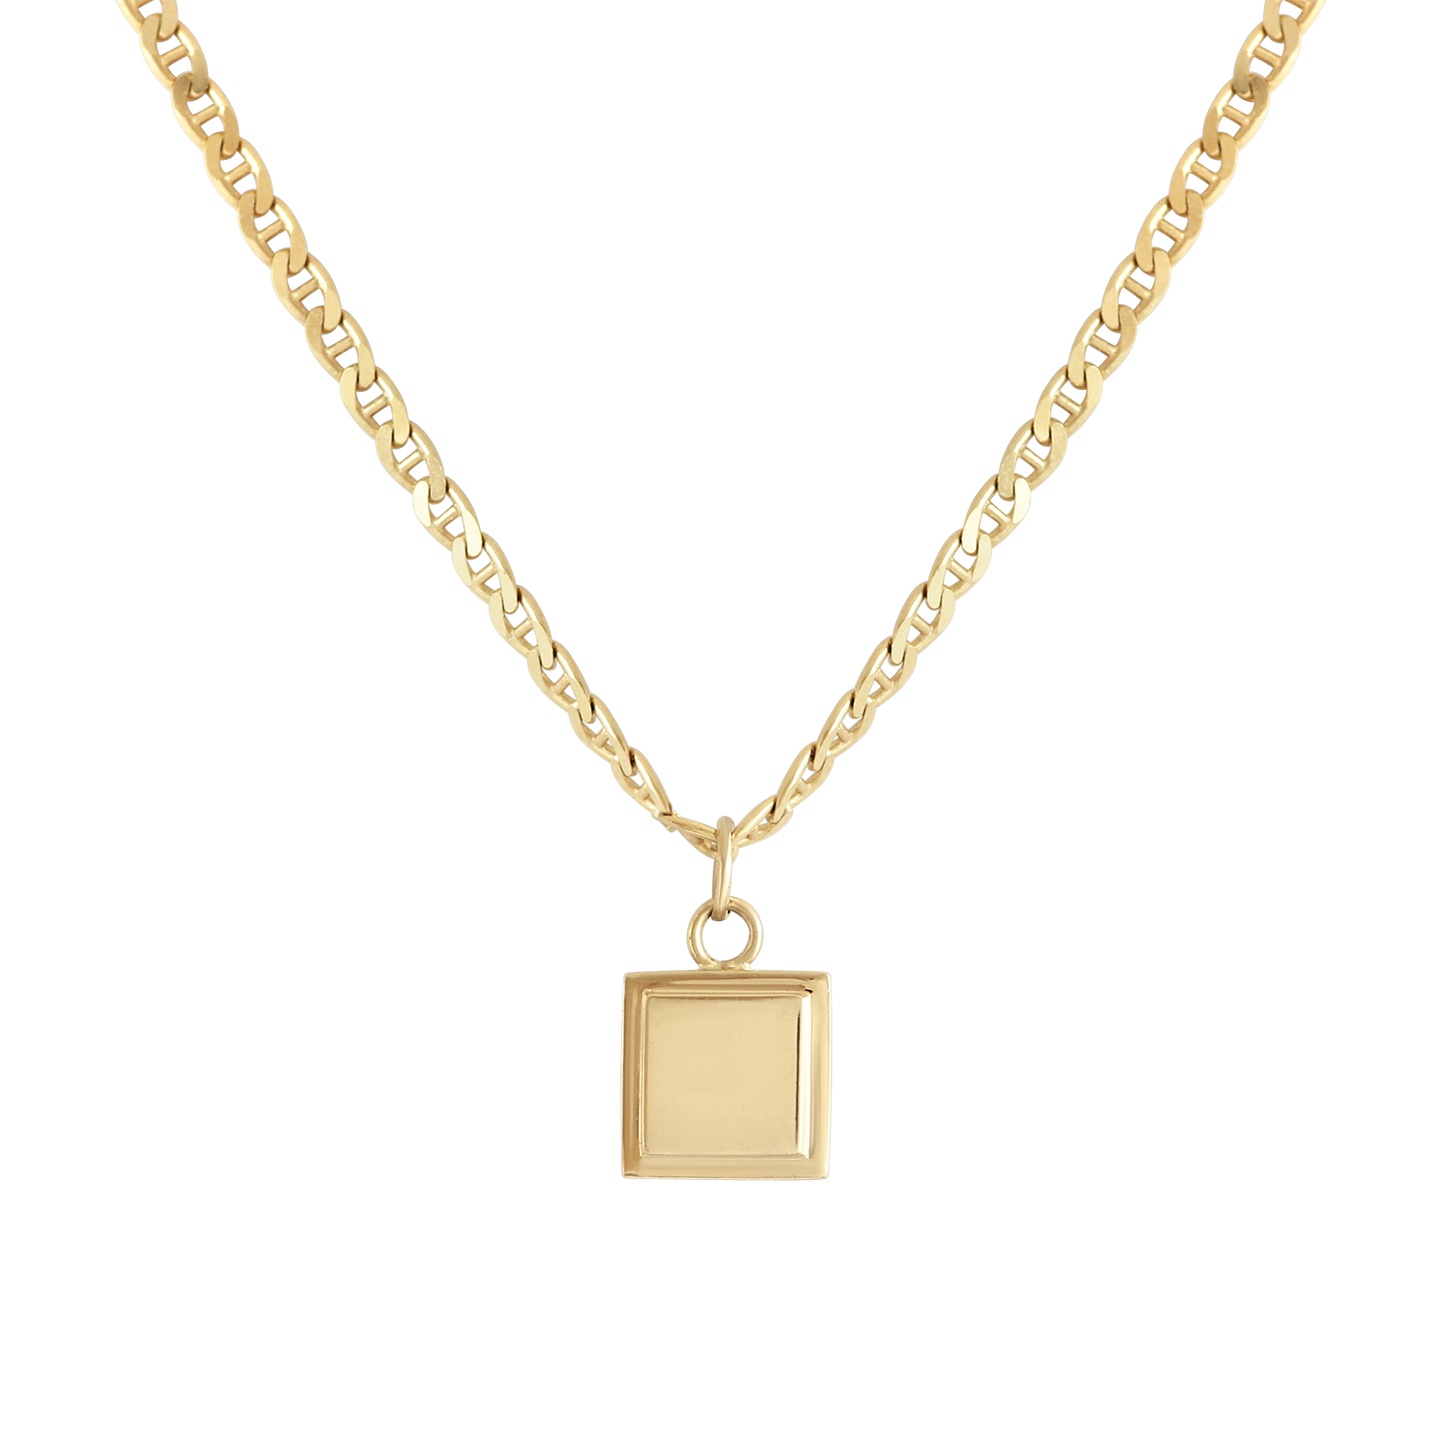 Step Frame Charm Square Necklace / Mariner Chain